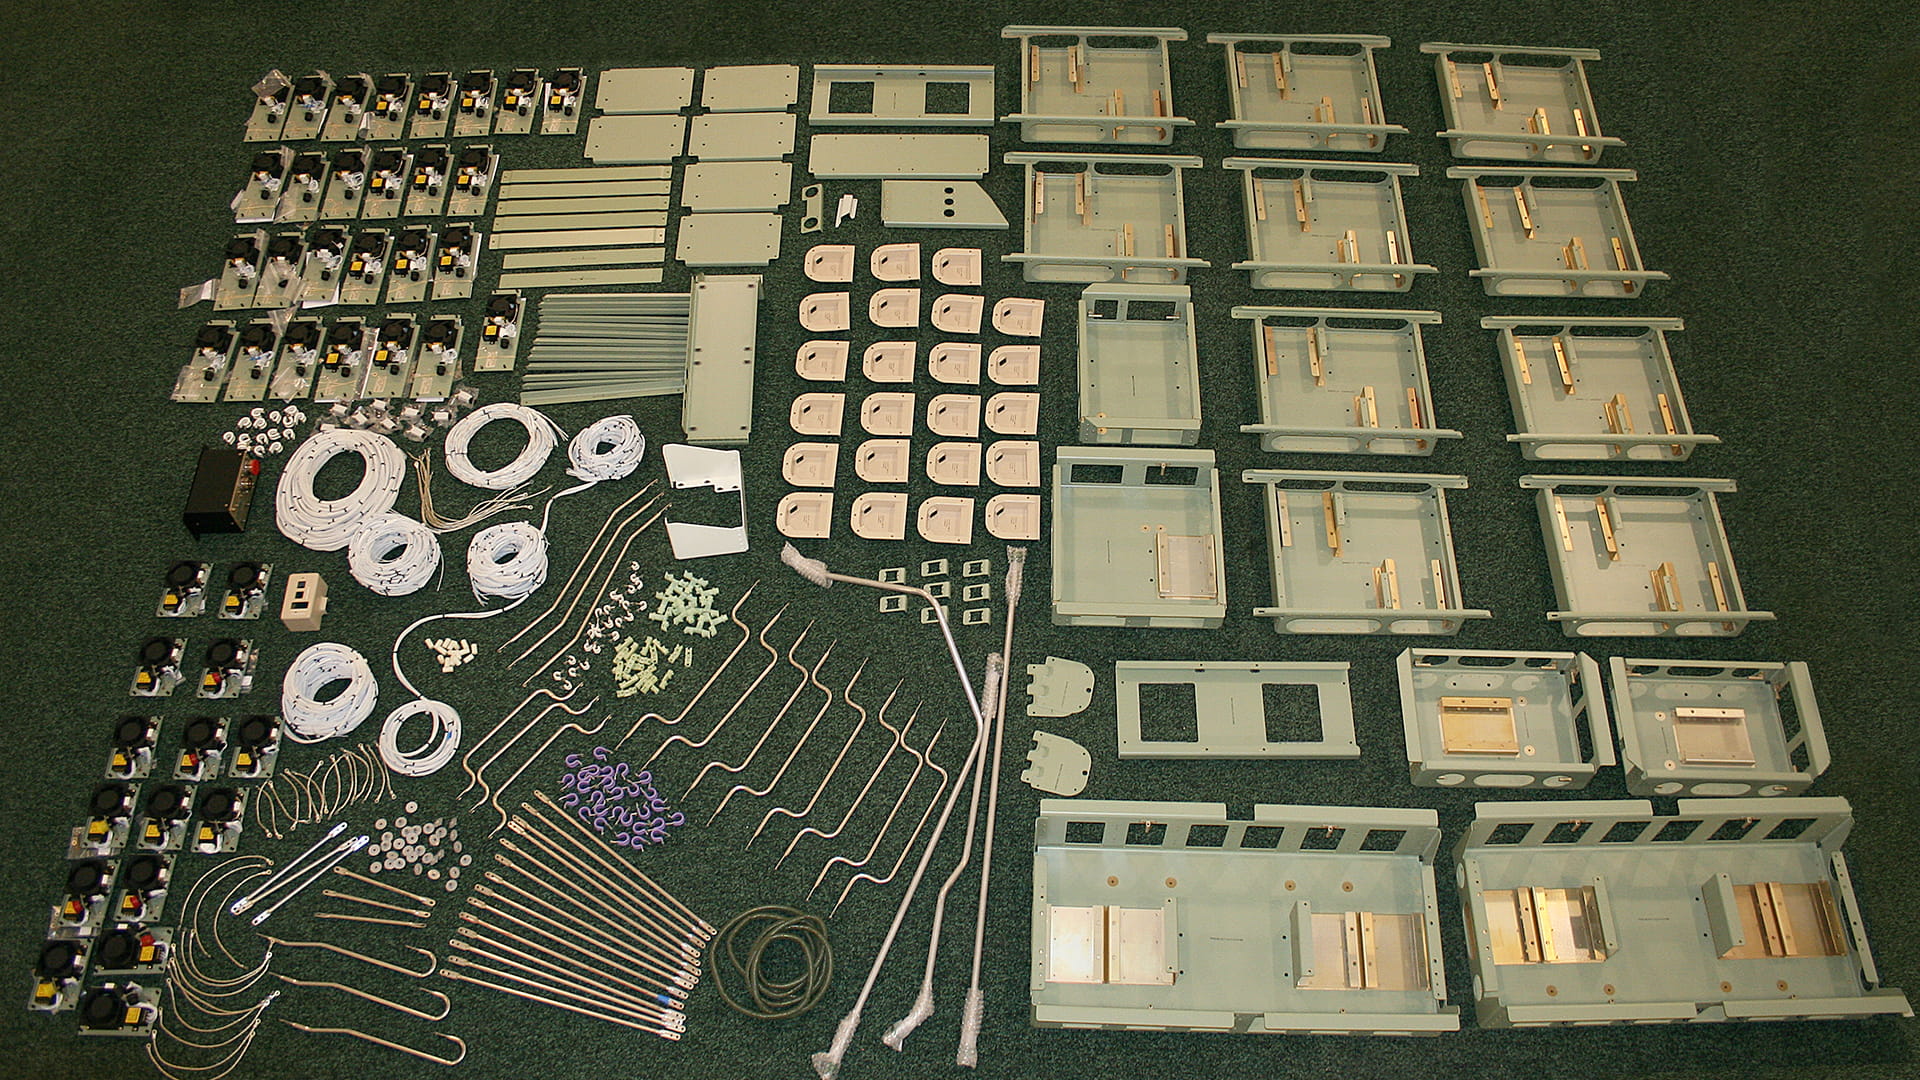 Equipment trays and components